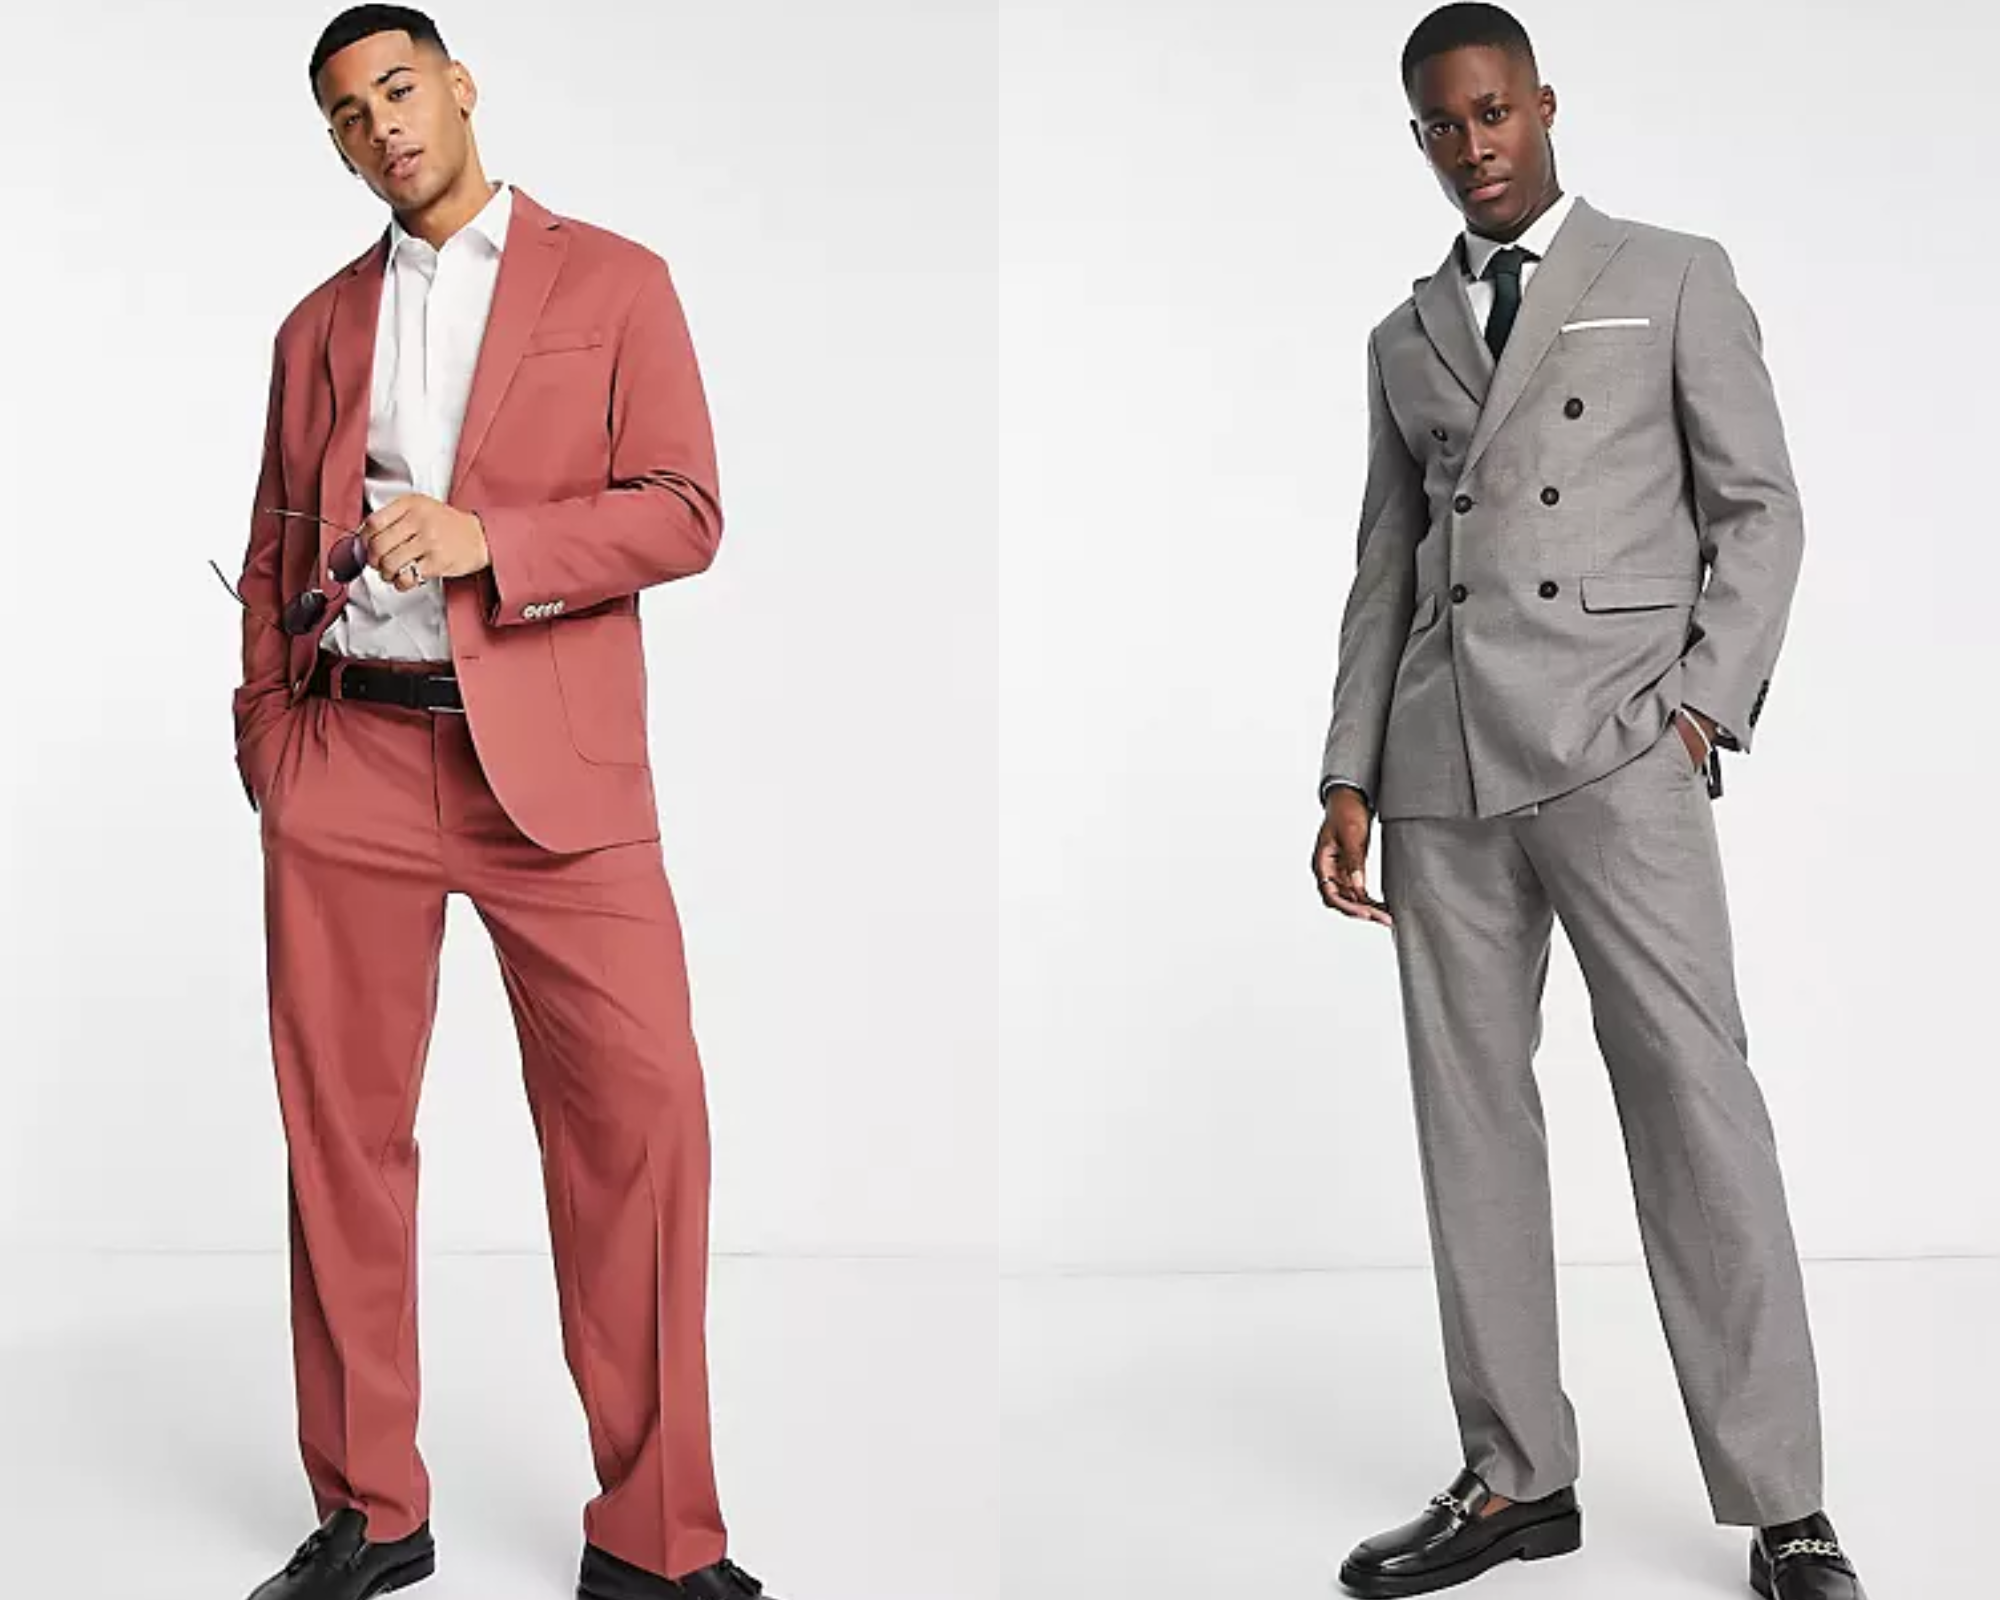 Men wearing relaxed suit